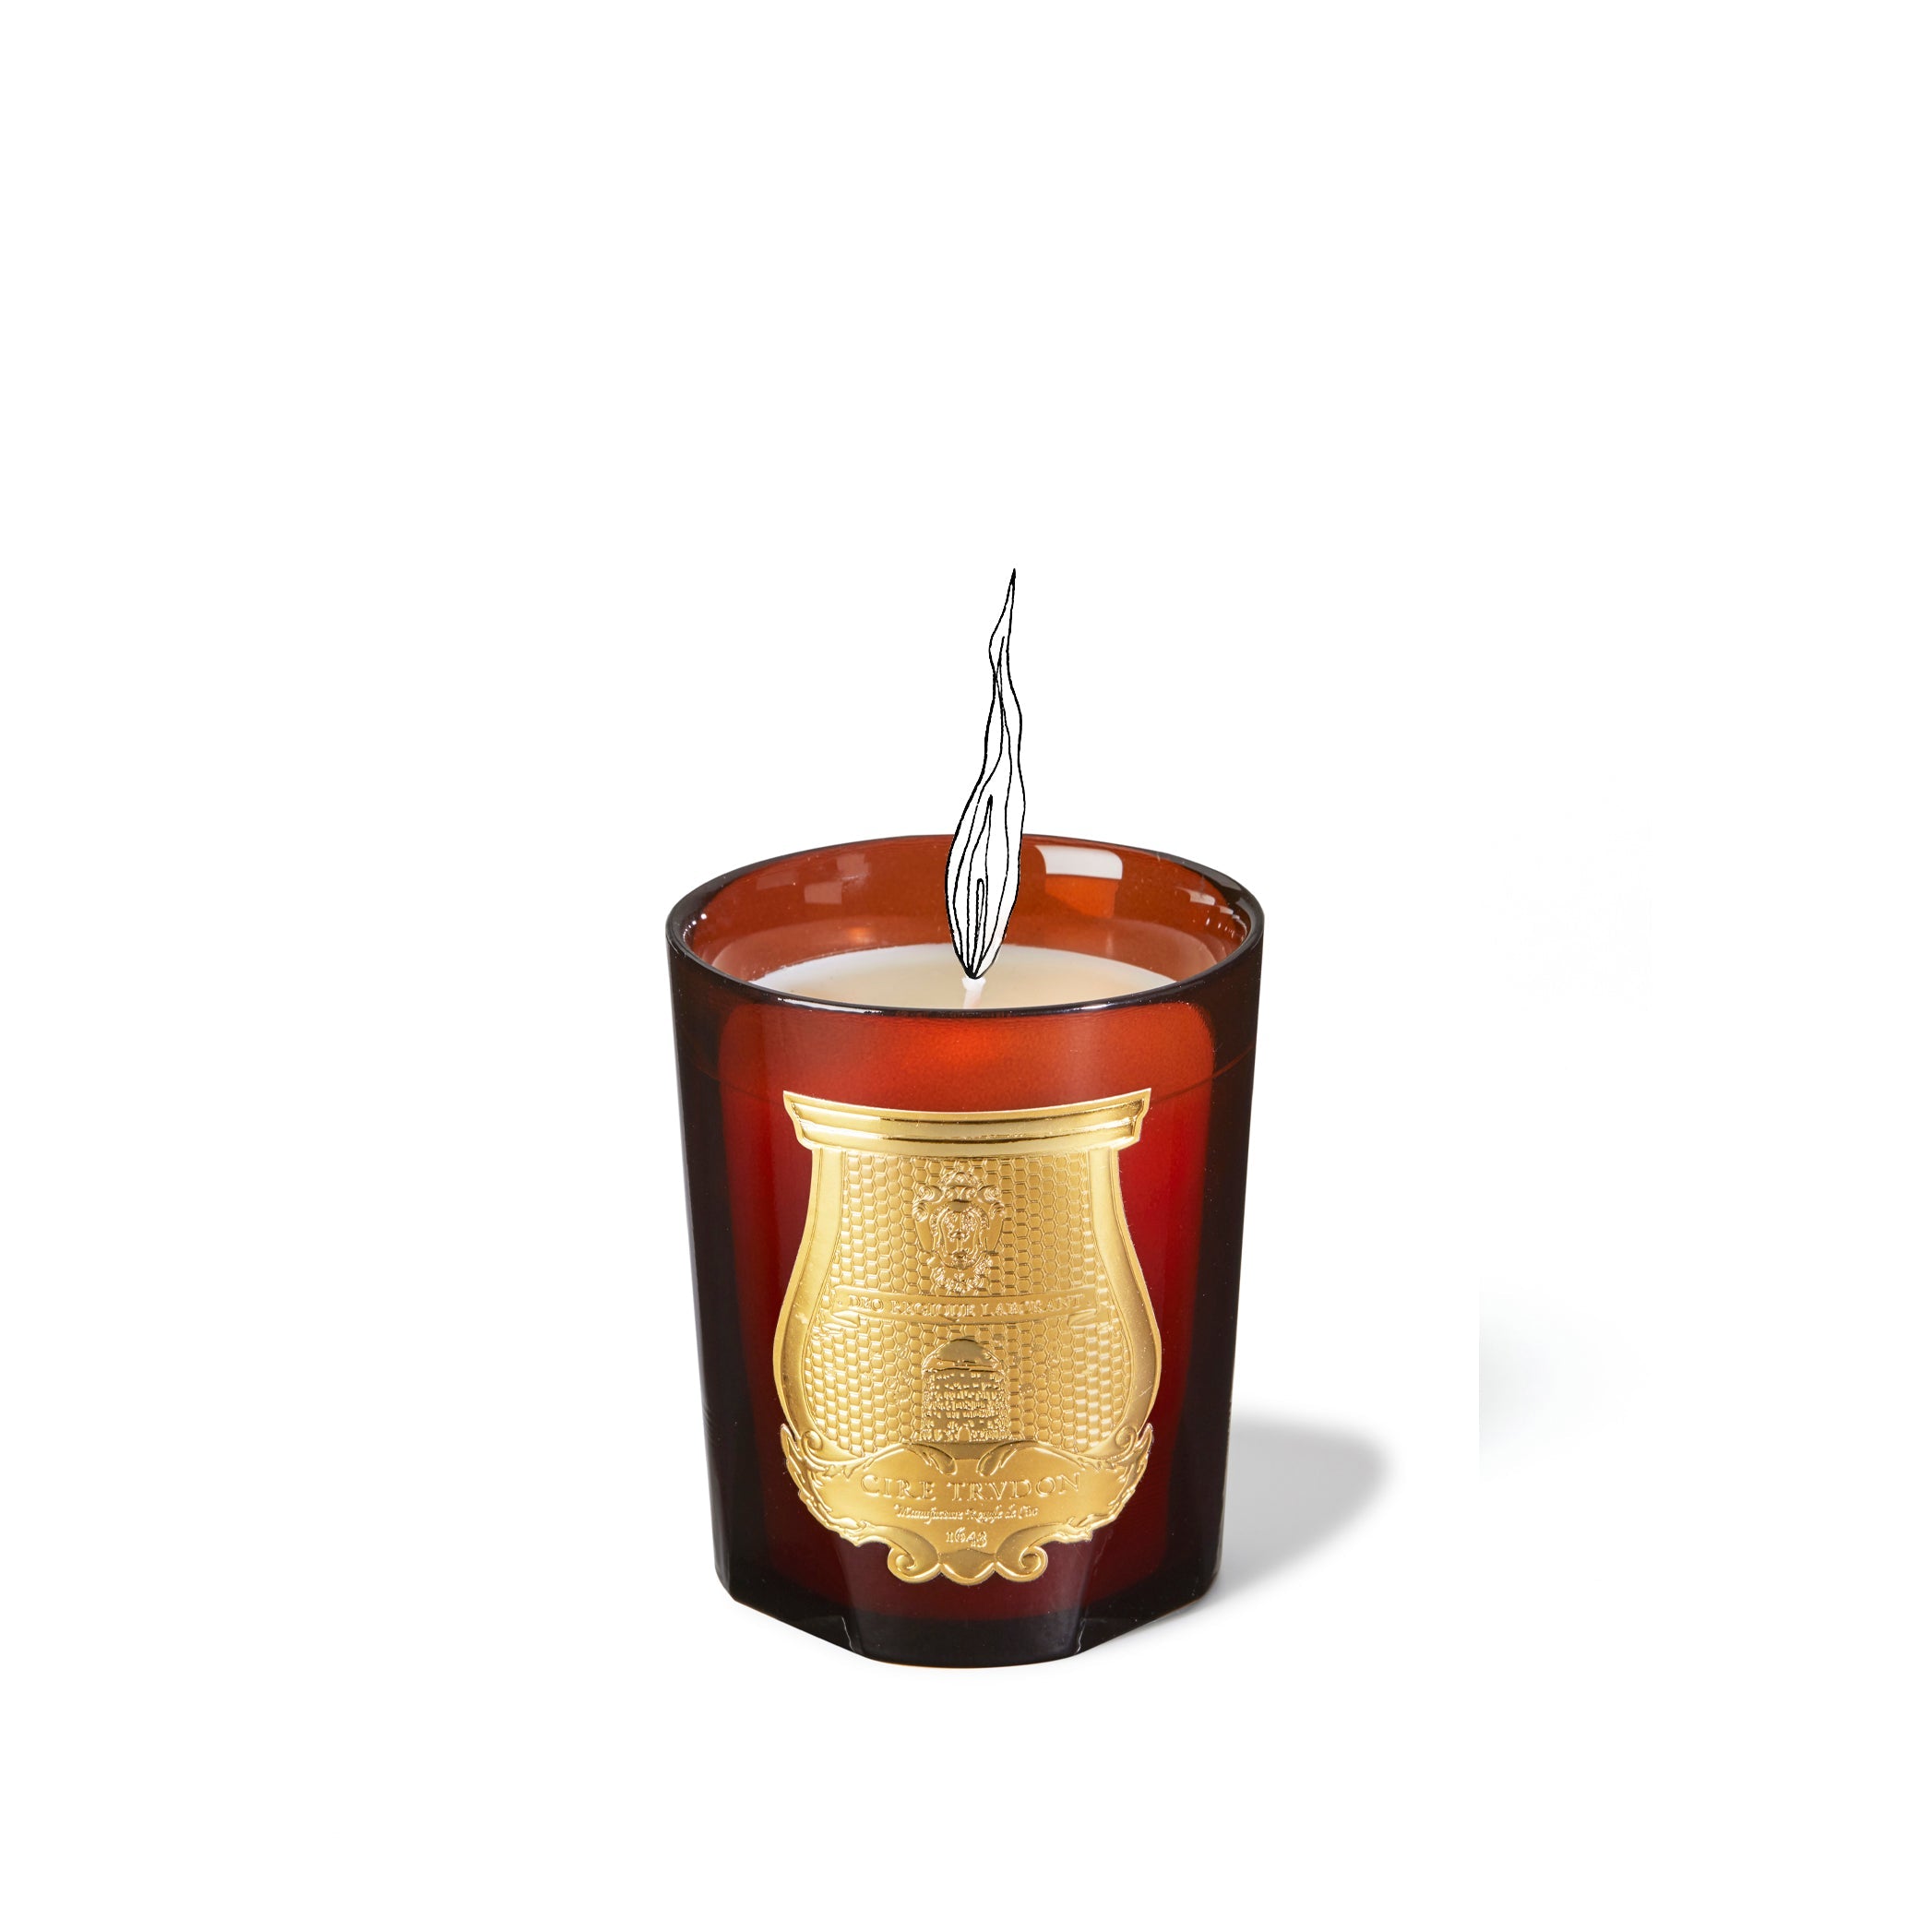 Classic Candle 'Original Beeswax' by Trudon, 270g